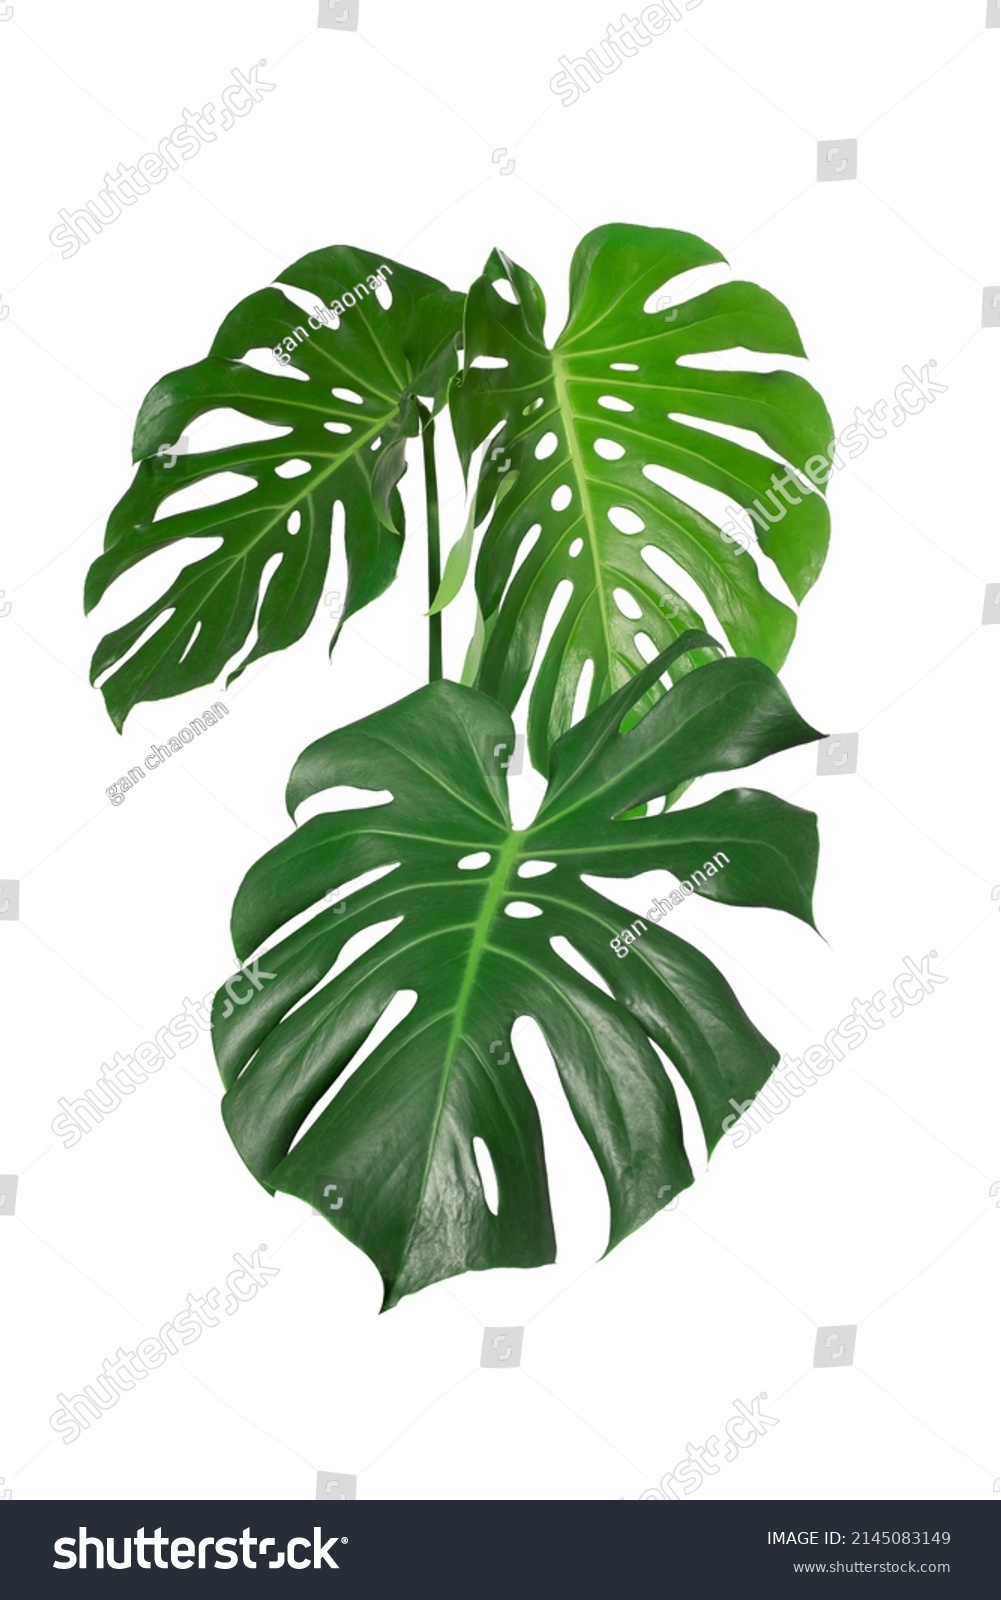 Dark green leaves of monstera or split leaf philodendron (Monstera deliciosa) tropical foliage plant growing in forest isolated on a white background, Monstera Deliciosa plant leaves. web designs.  #2145083149